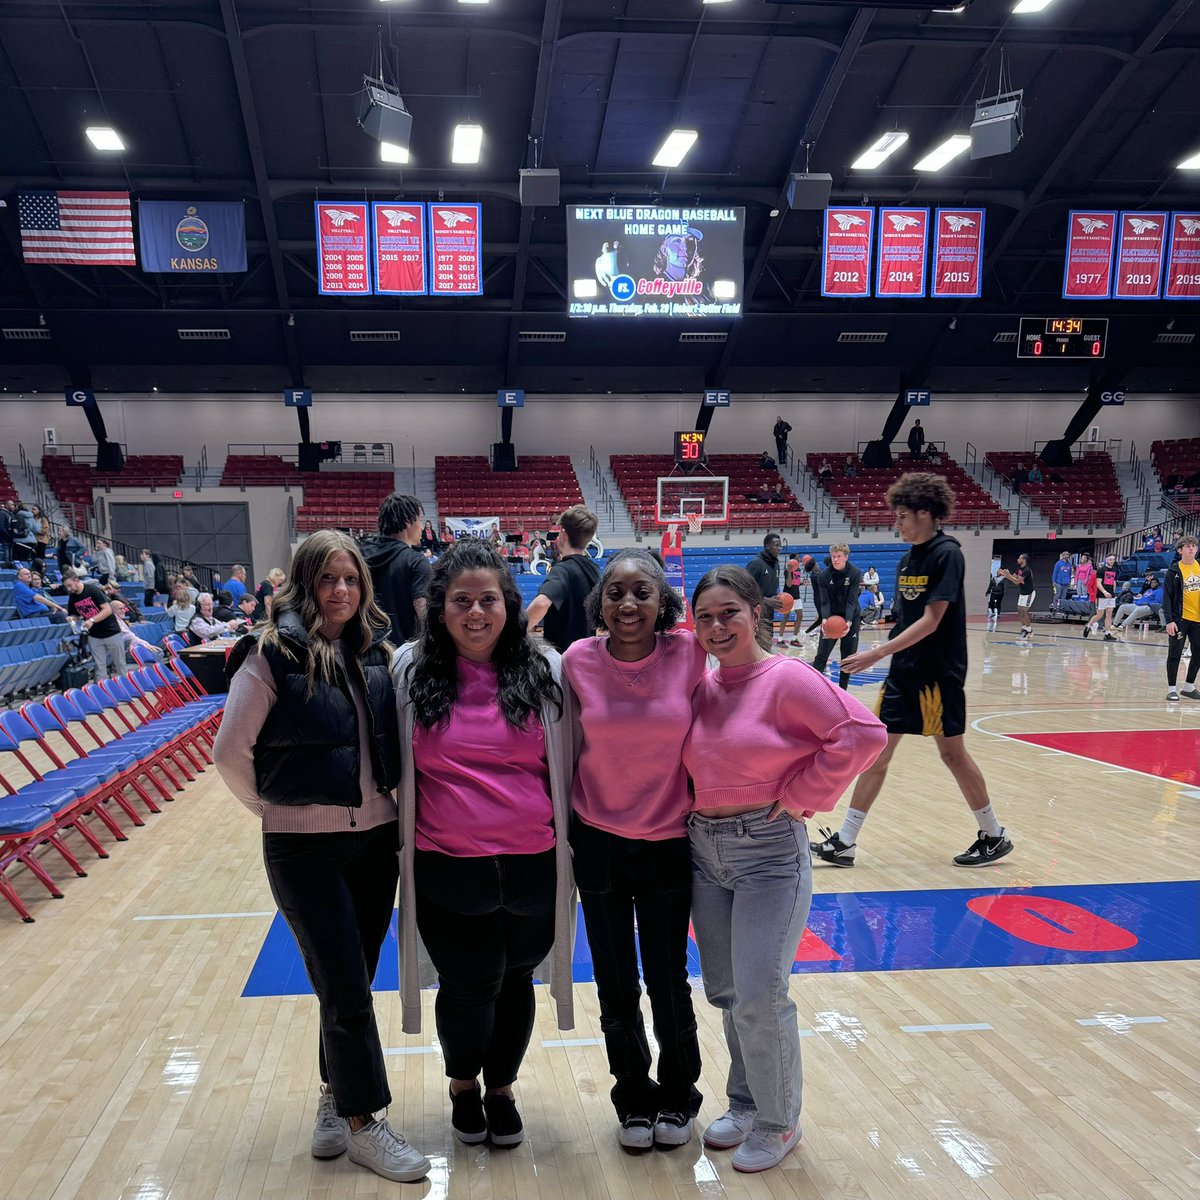 Blue Dragons got the win for pinkout night and raised money for Cancer Council of Reno County. 
Let’s keep it rolling Blue Dragons! 
#breathefire #pinkladies #cancercouncilofrenocounty #cancersucks #3sforthecure